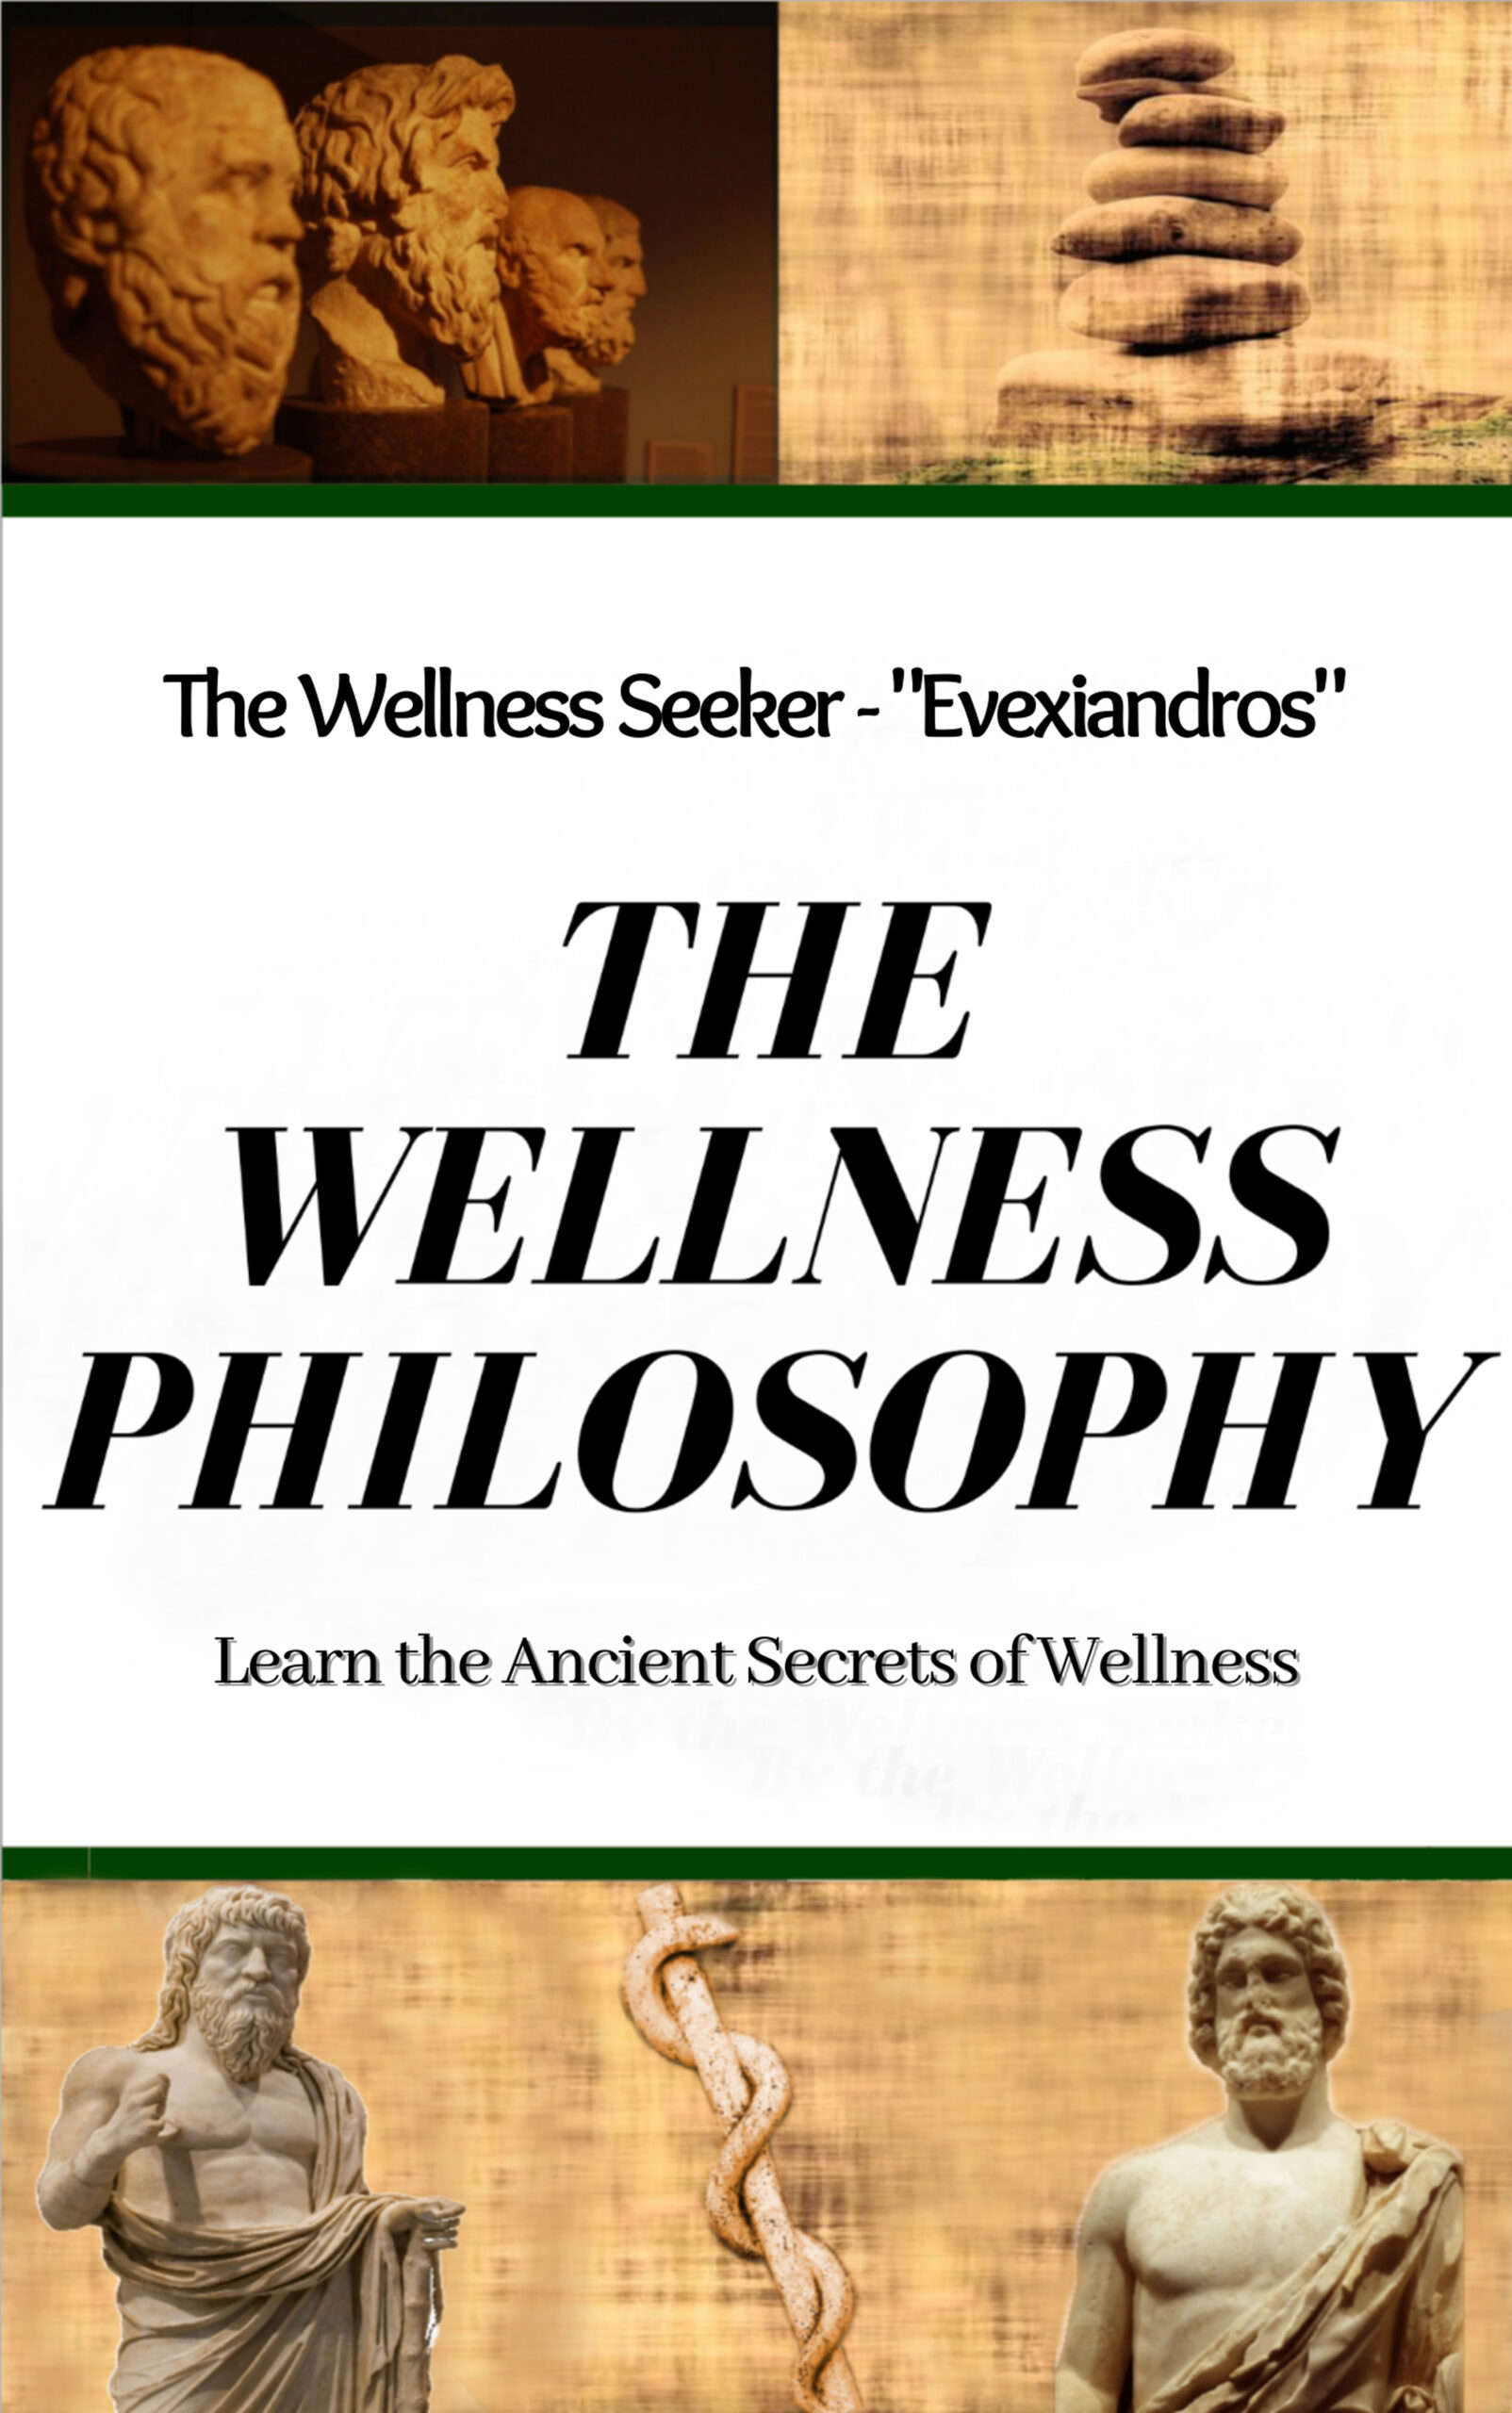 FREE: The Wellness Philosophy by Evexiandros